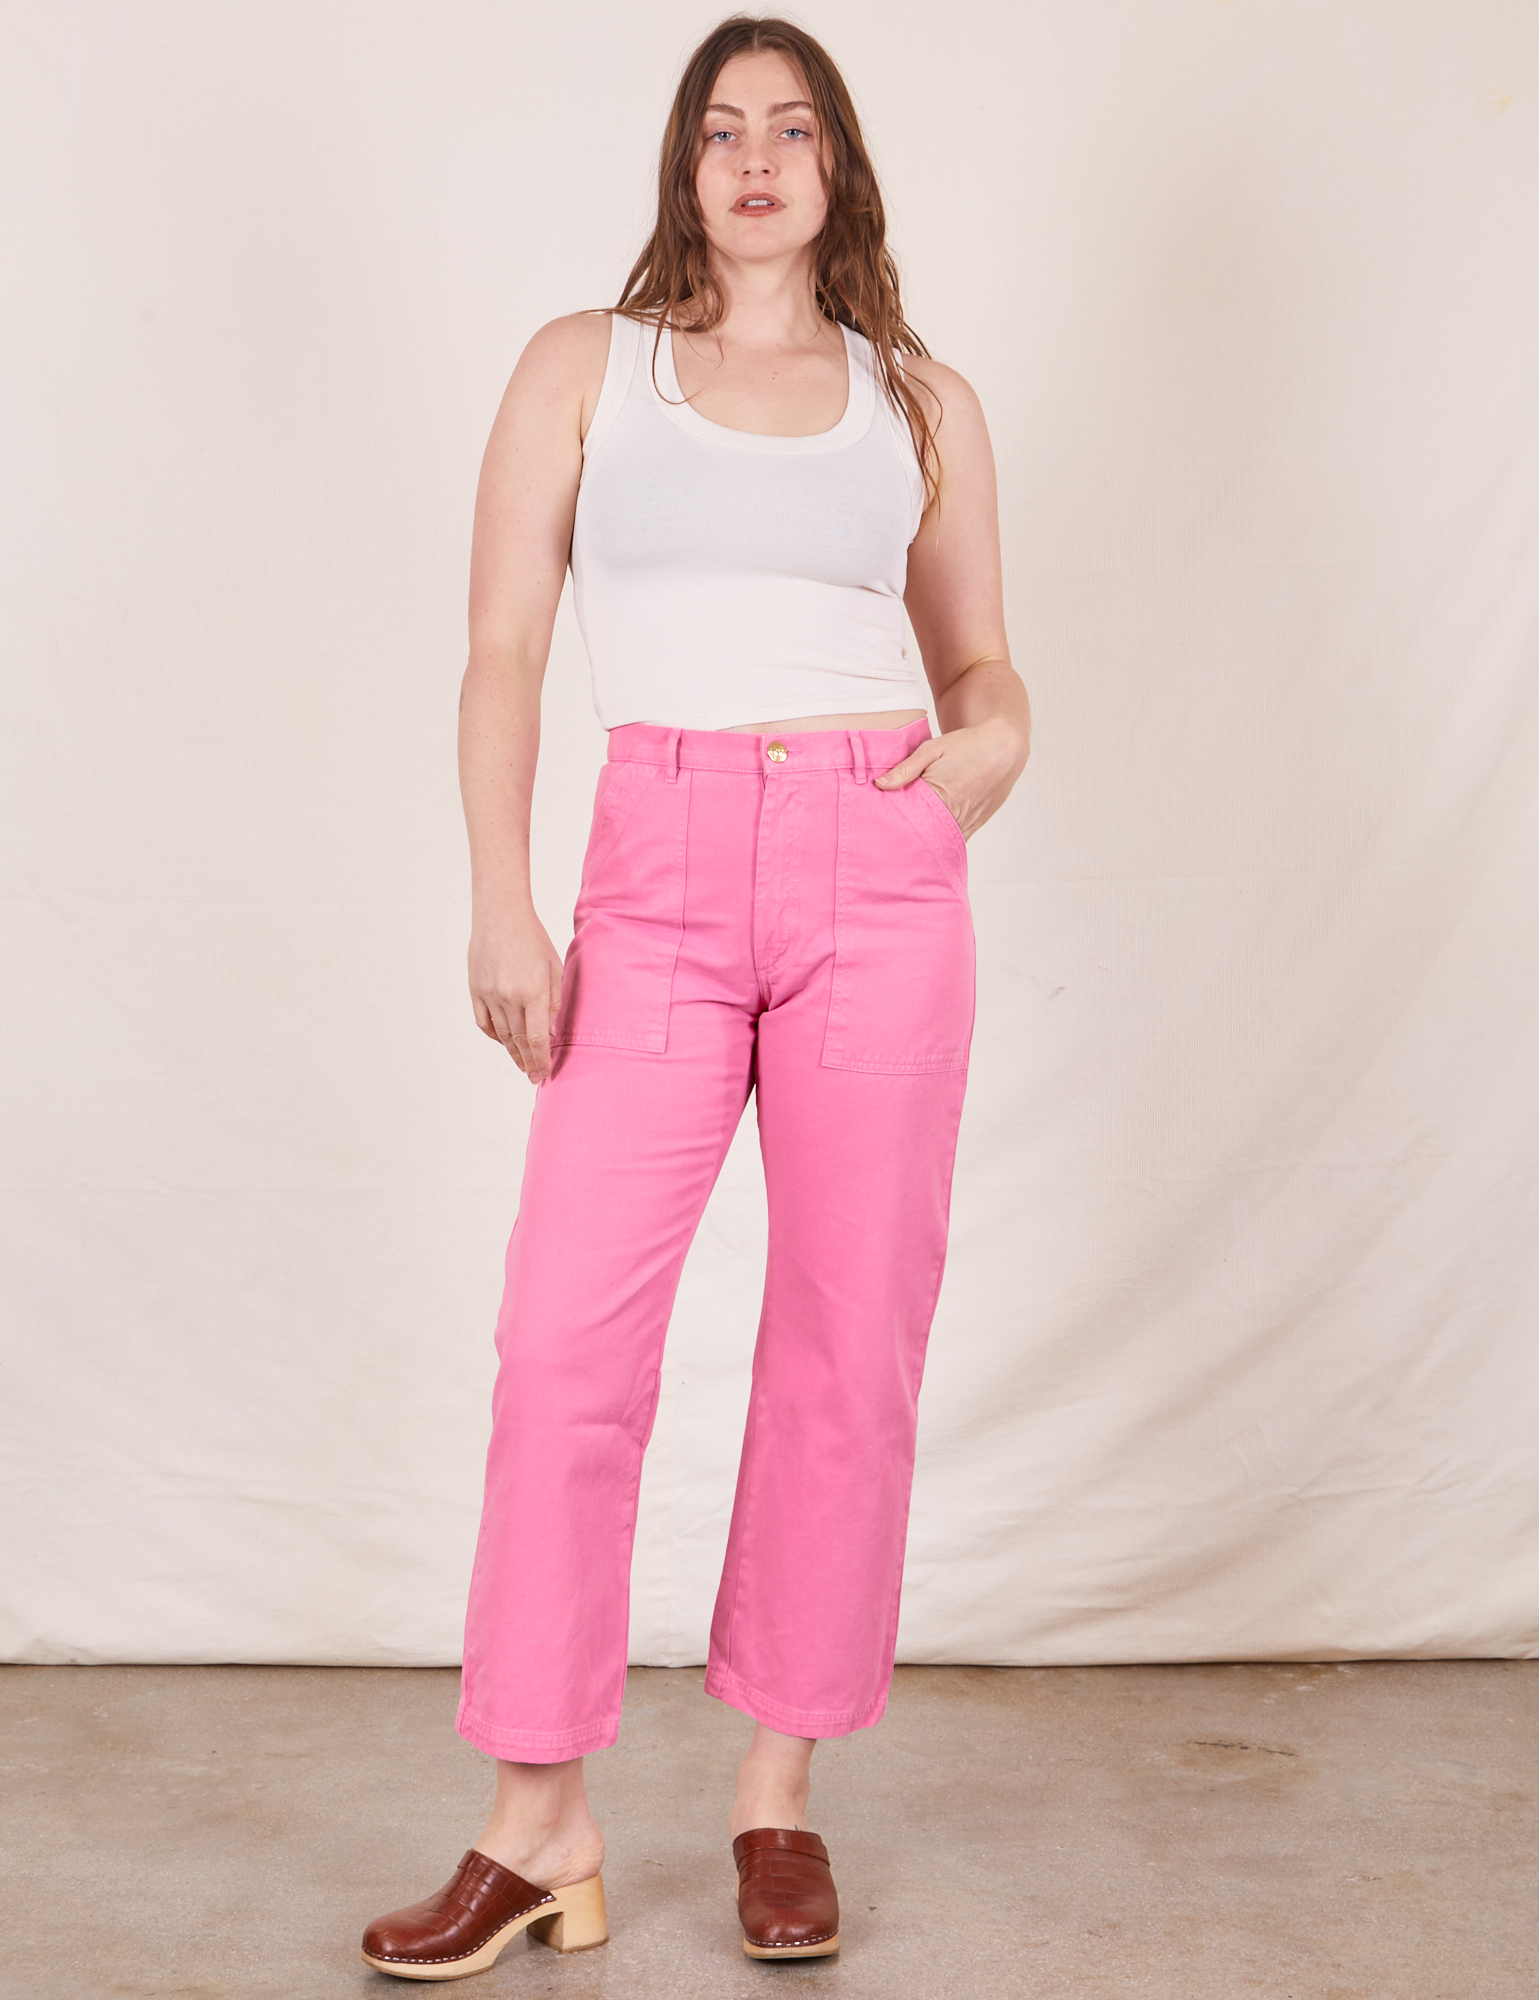 Allison is 5&#39;10&quot; and wearing size S Work Pants in Bubblegum Pink paired with Tank Top in vintage tee off-white